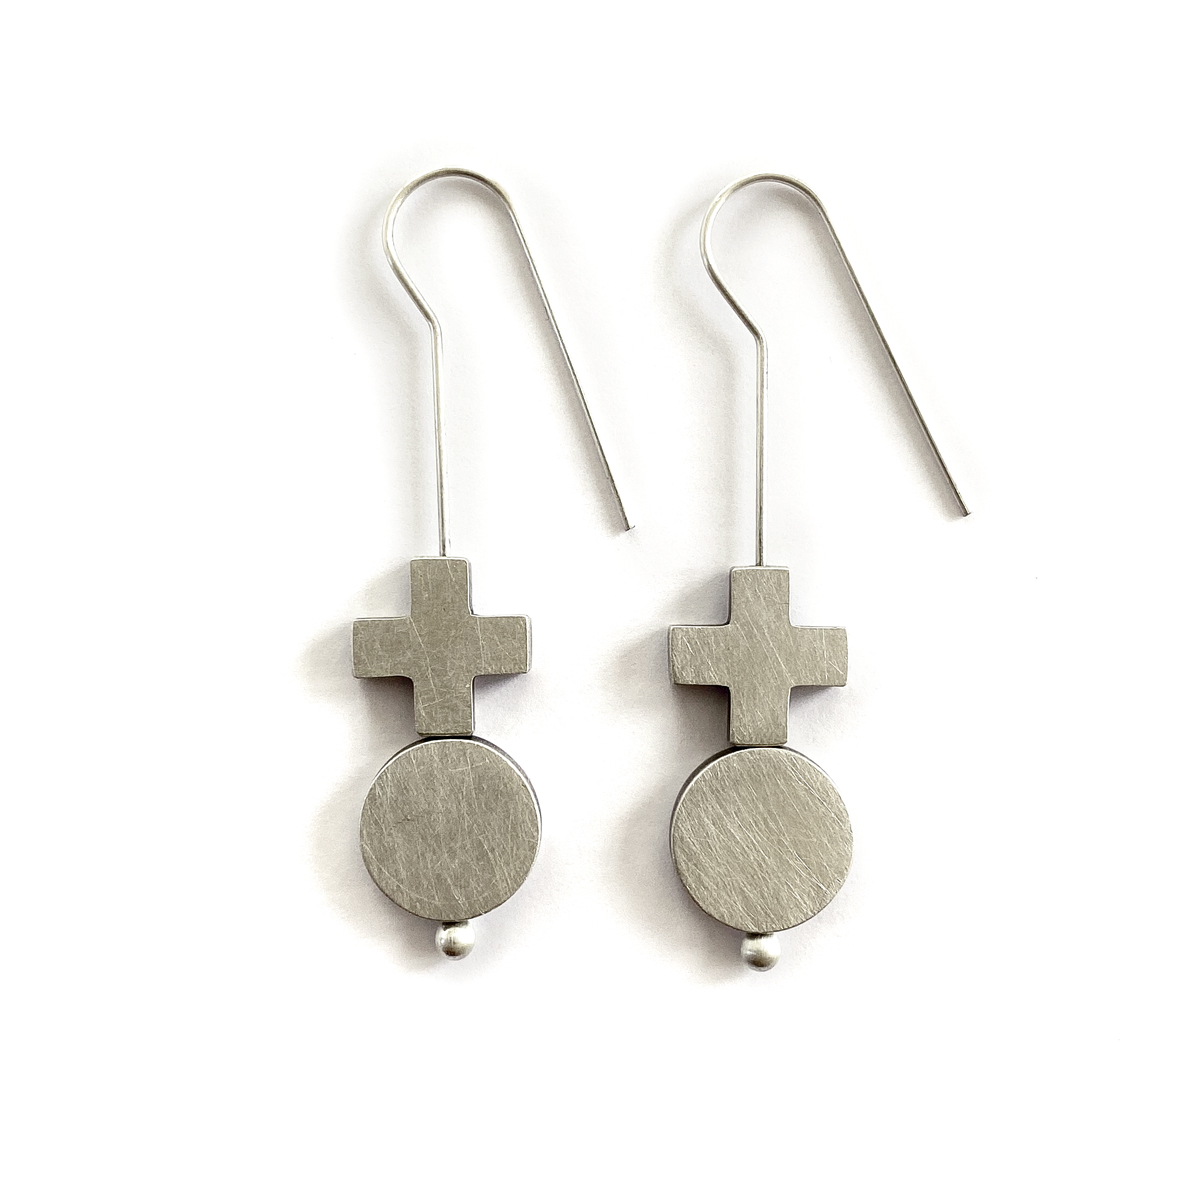 Turning Point Earrings, sterling silver, 2020, Kate Alterio